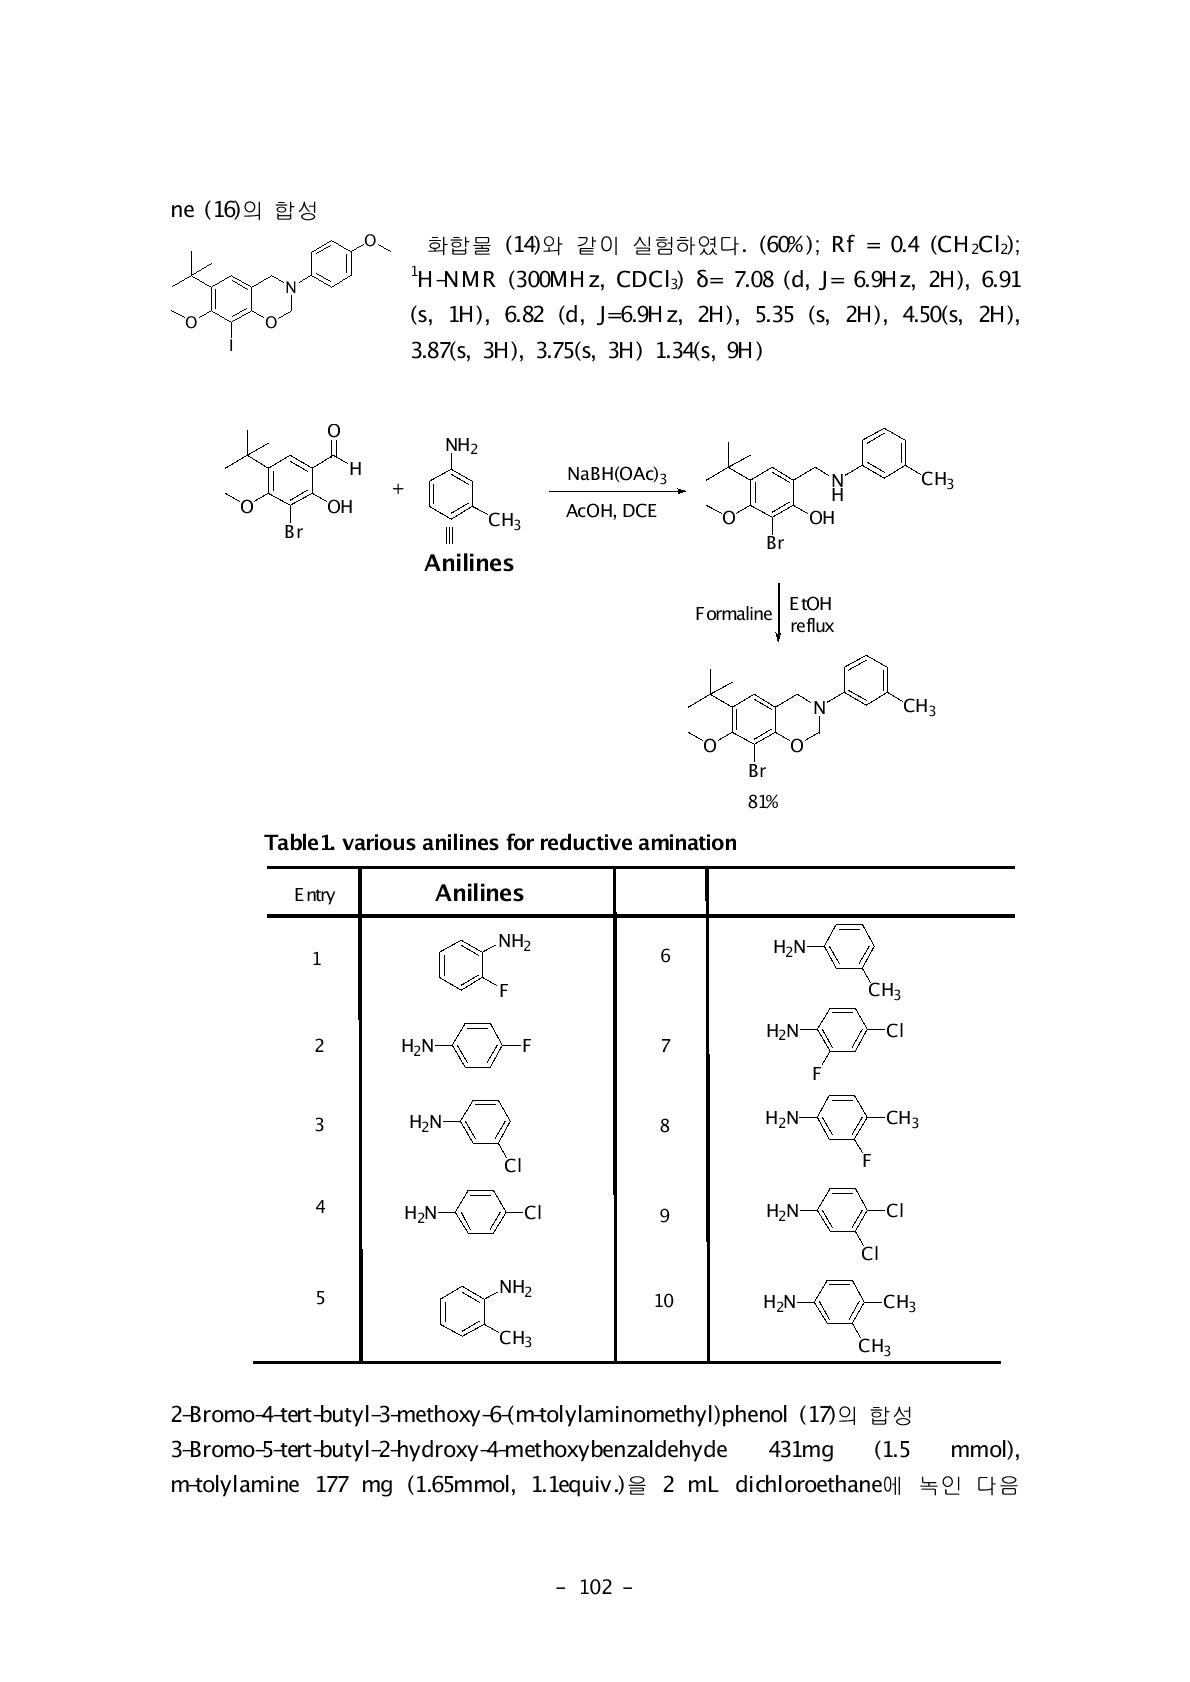 various anilines for reductive amination